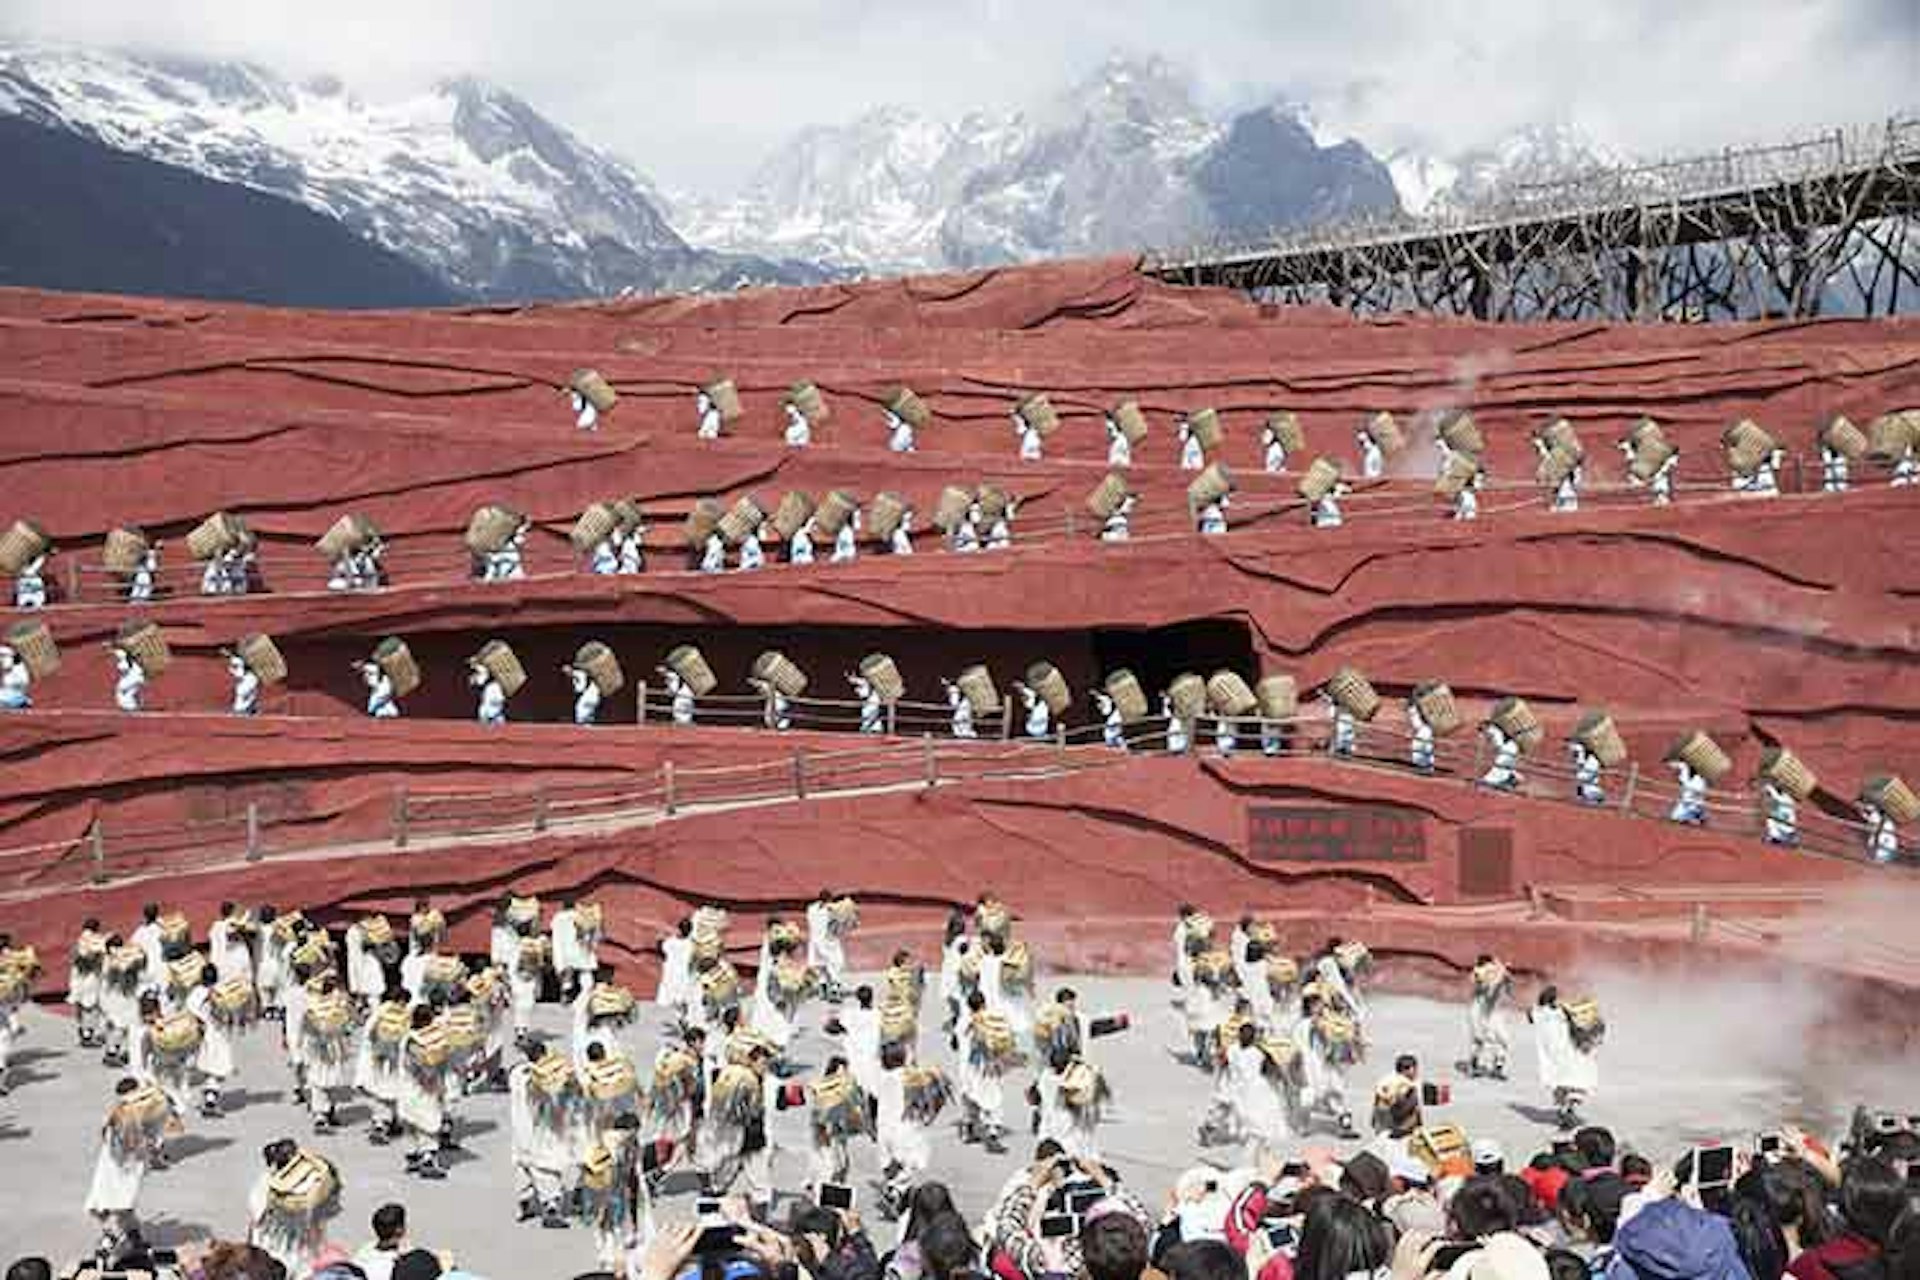 Performance at Jade Dragon Mountain in Lijiang. Image by Anna Willett / Lonely Planet